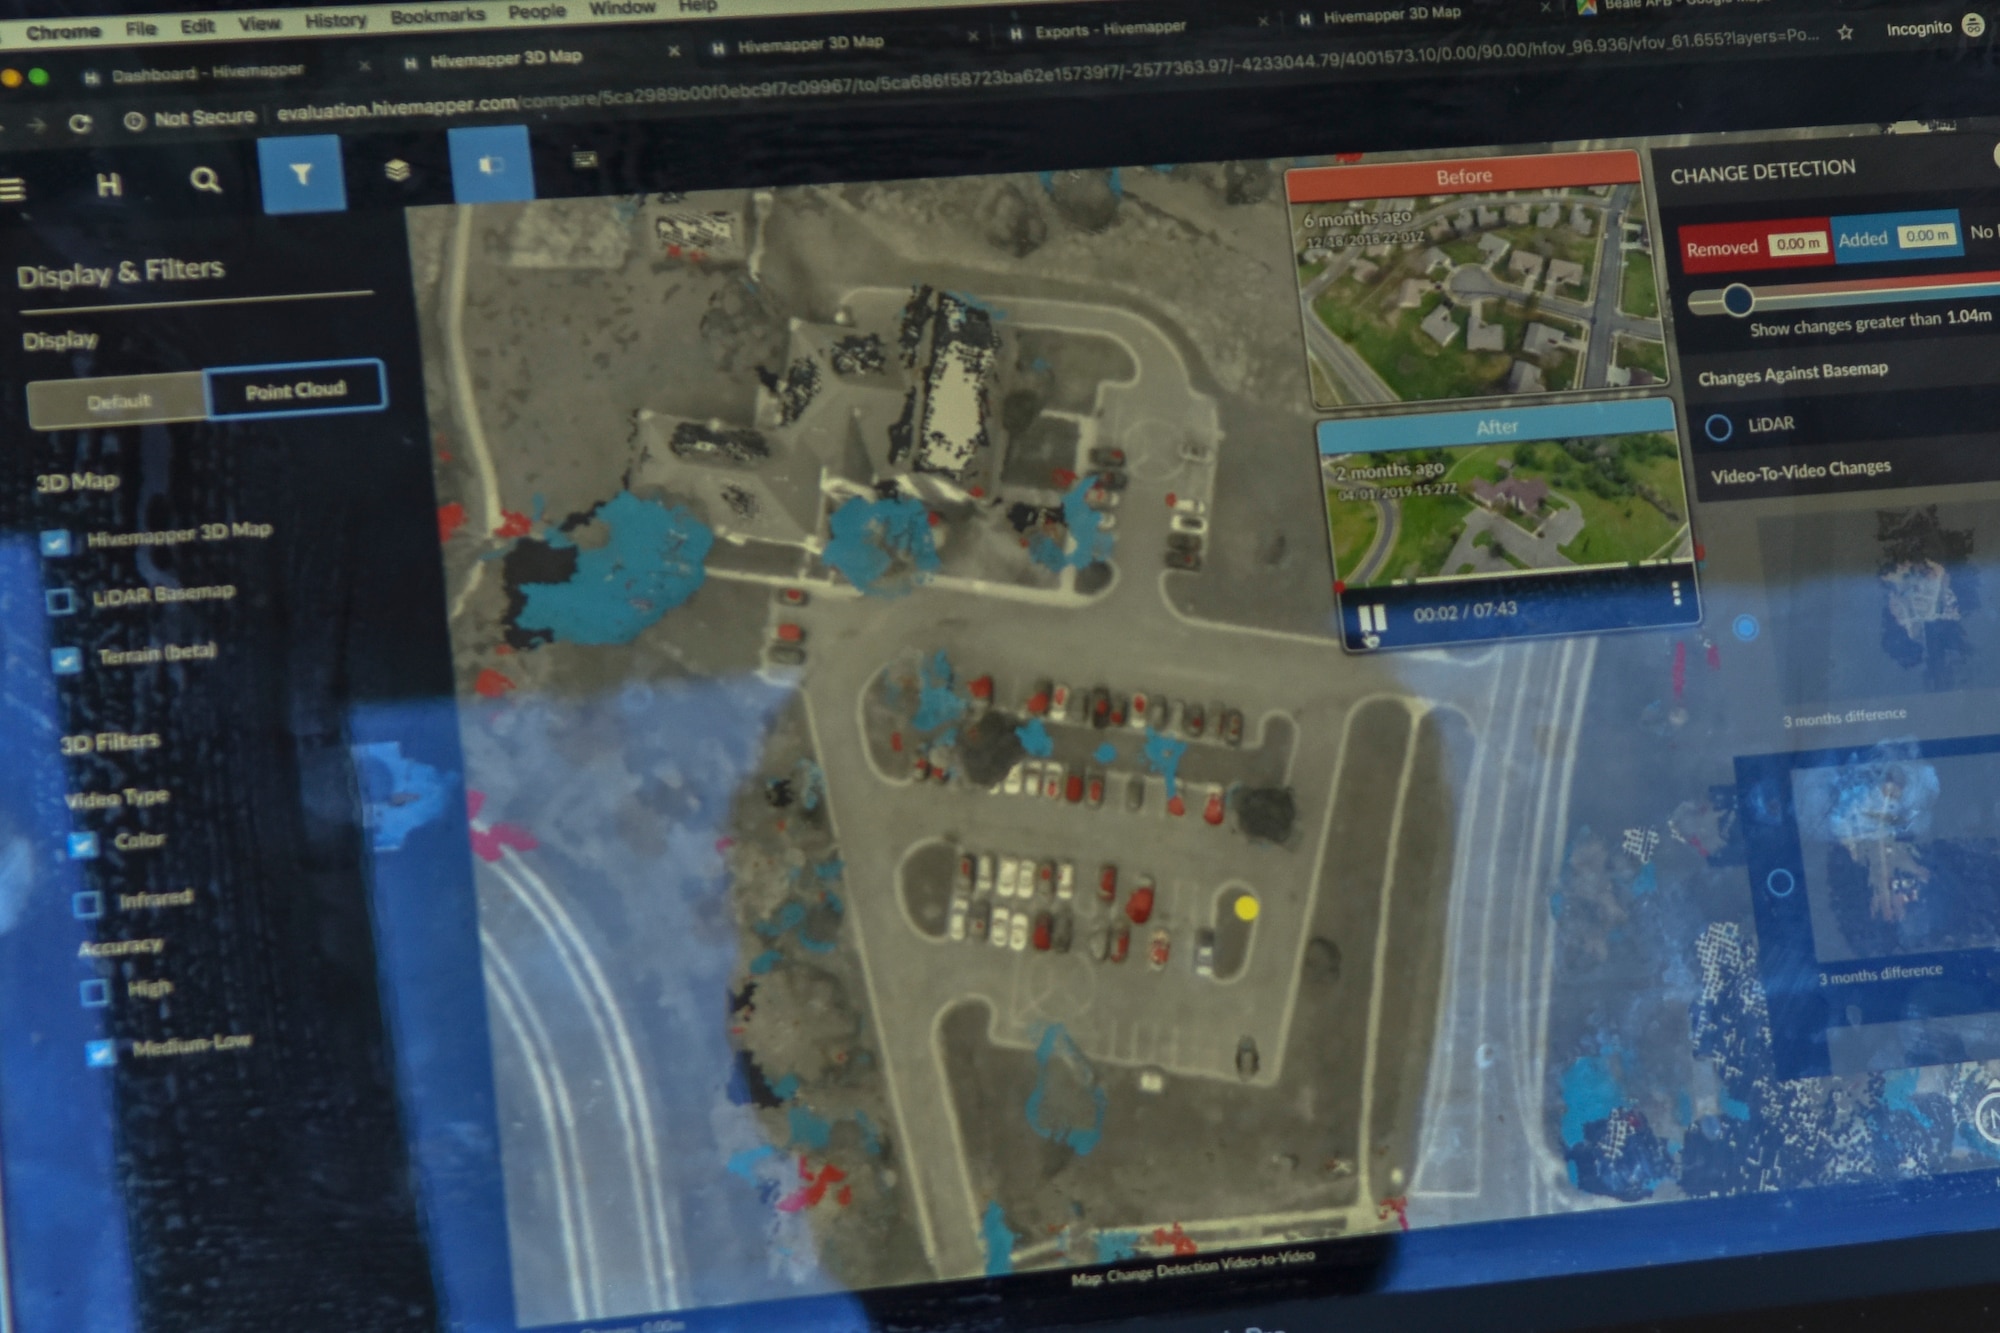 A map is shown depicting drone imagery capabilities at the Hivemapper software company in San Francisco, California, June 4, 2019. Beale is currently the first base to beta-test the Hivemapper program, a drone capability that records and senses change detection. (U.S. Air Force photo by Tech. Sgt. Veronica Montes)